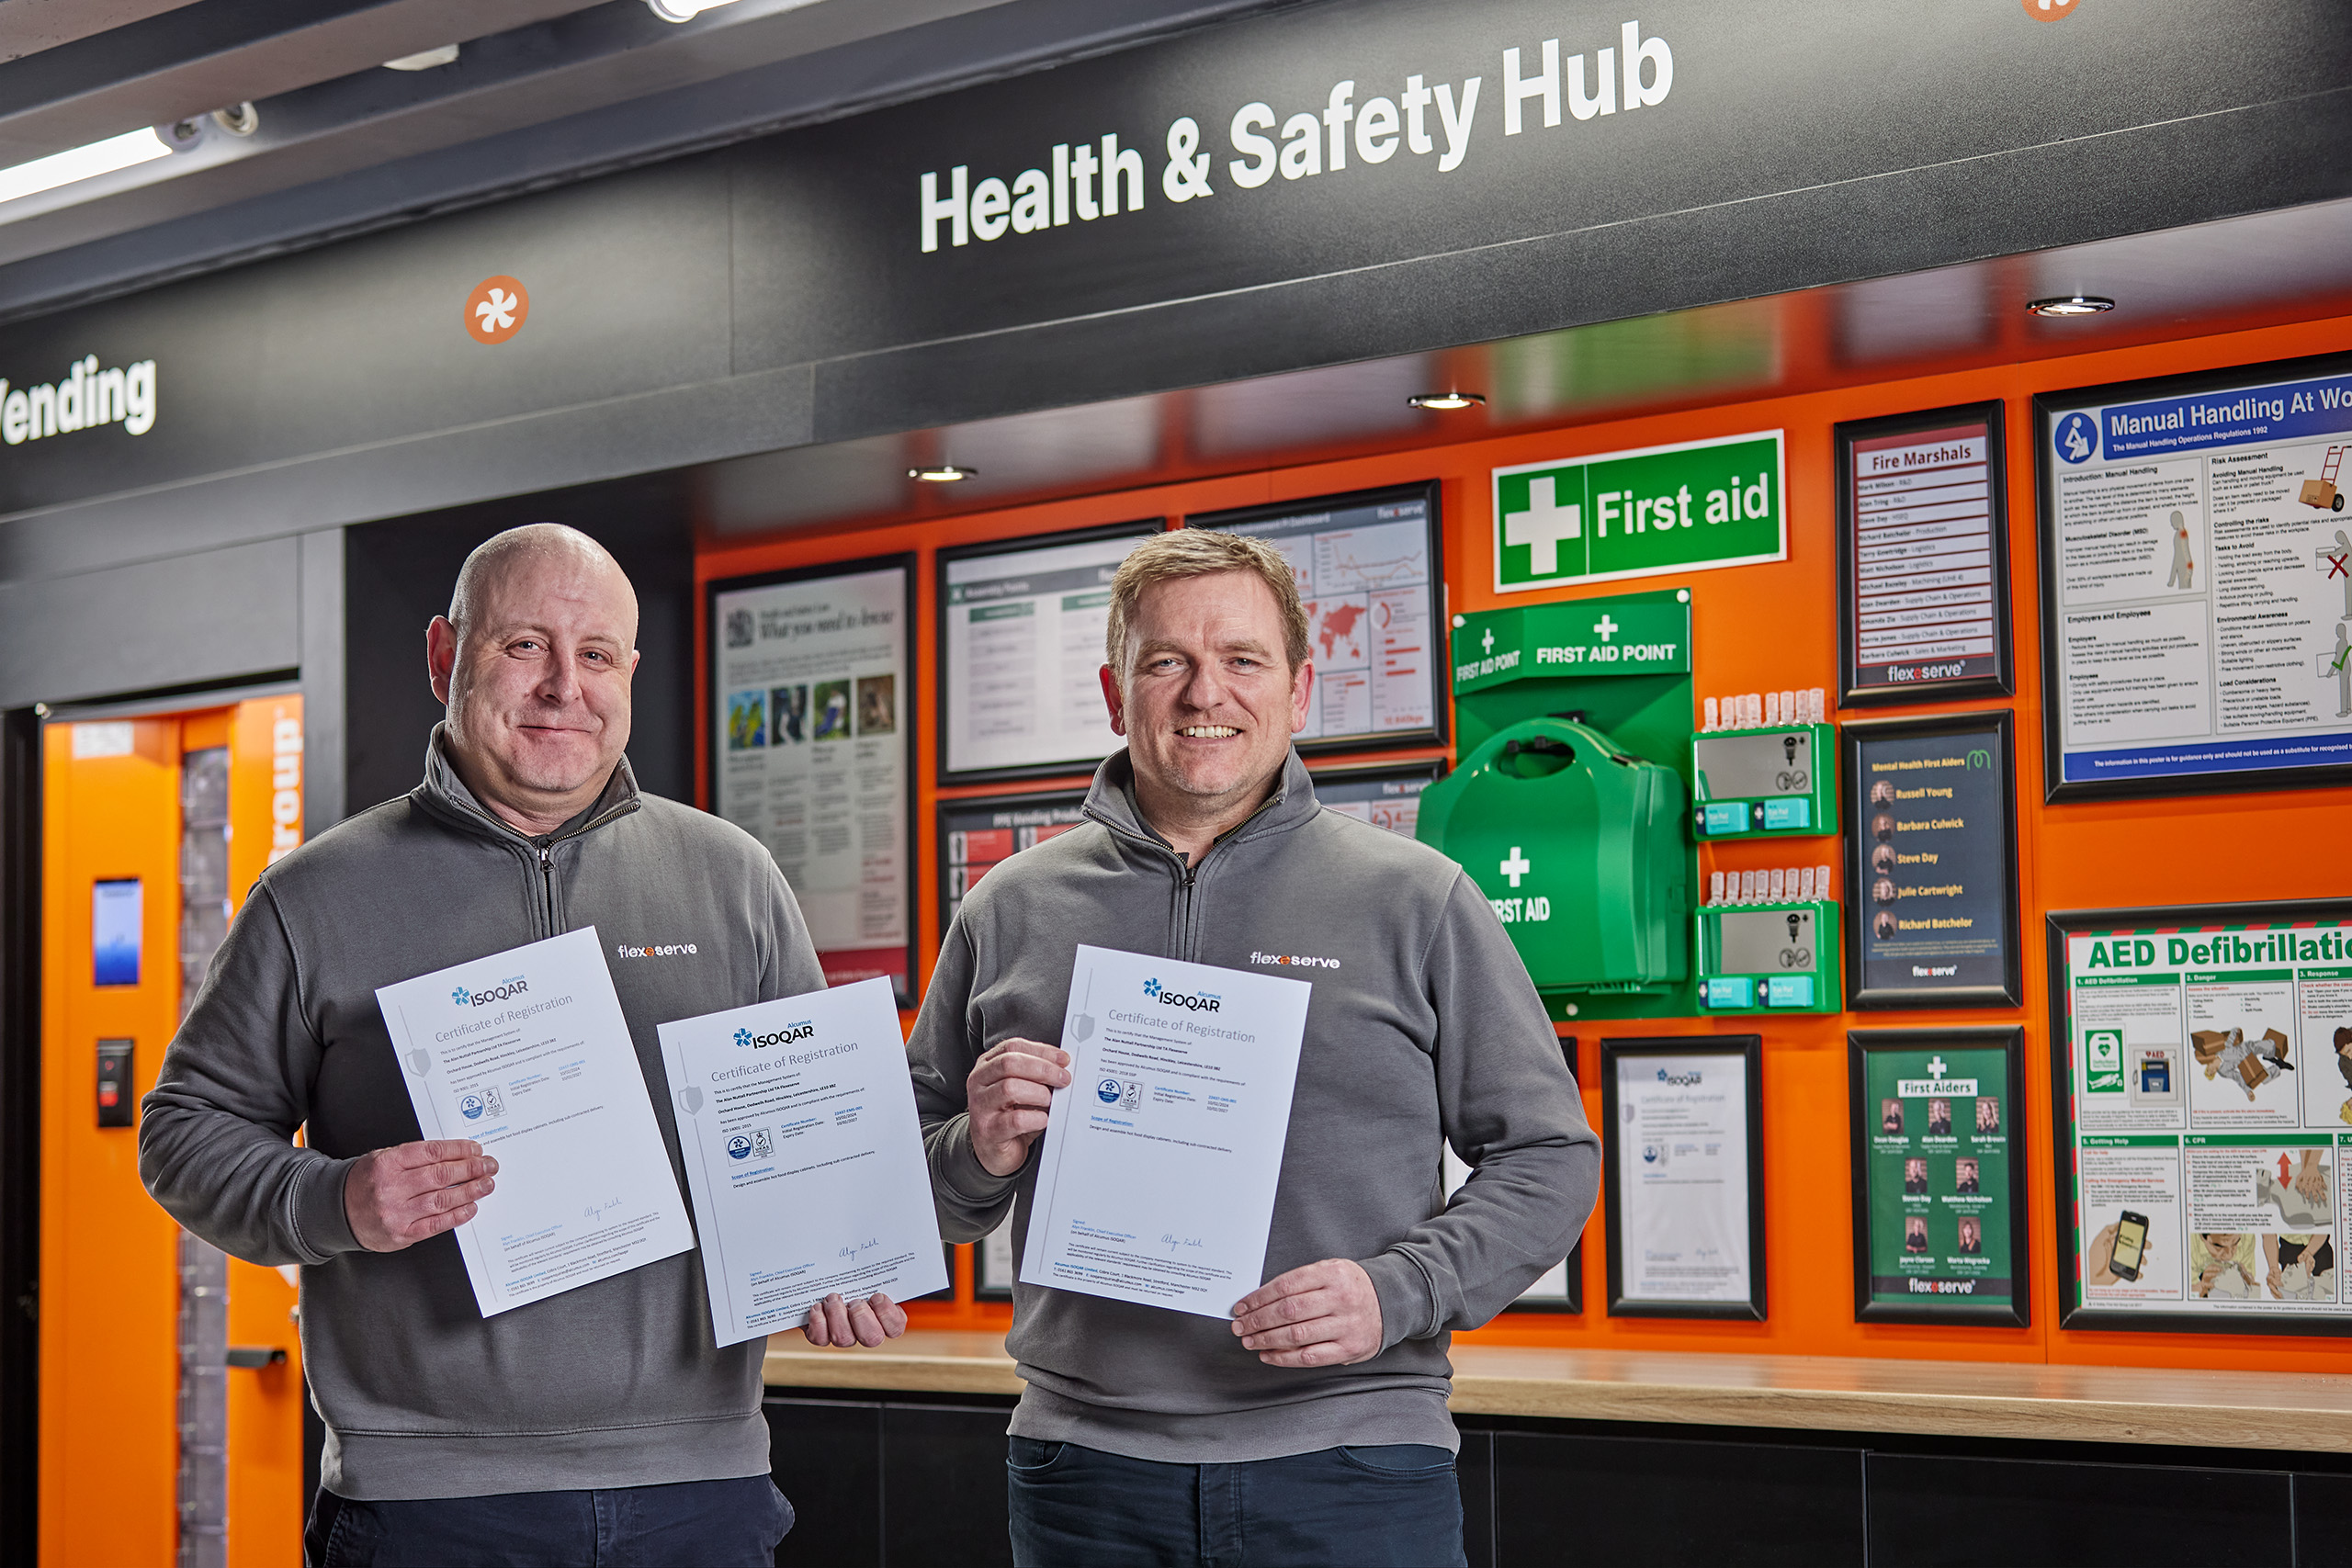 [L-R] Anthony Stubbs, HSEQ Manager and Mark Manley, Director of Manufacturing Operations pictured next to the Flexeserve Health & Safety Hub with ISO certifications 9001, 14001 and 45001